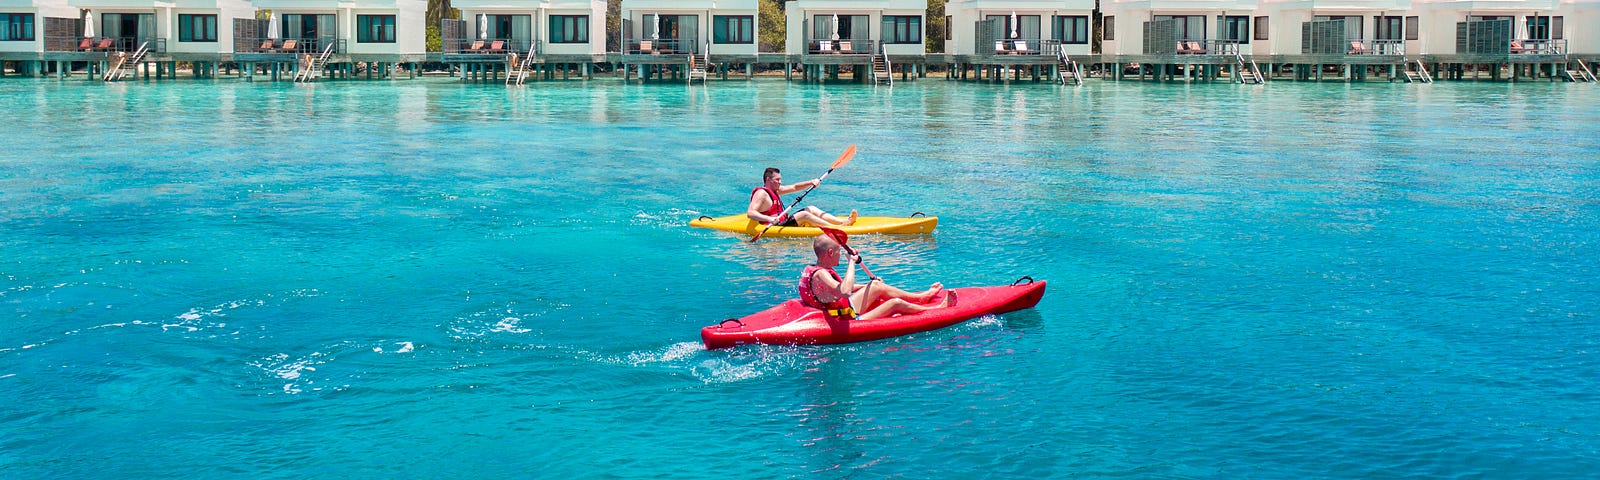 Photographs of two people on kayaks with holiday appartments in the background.